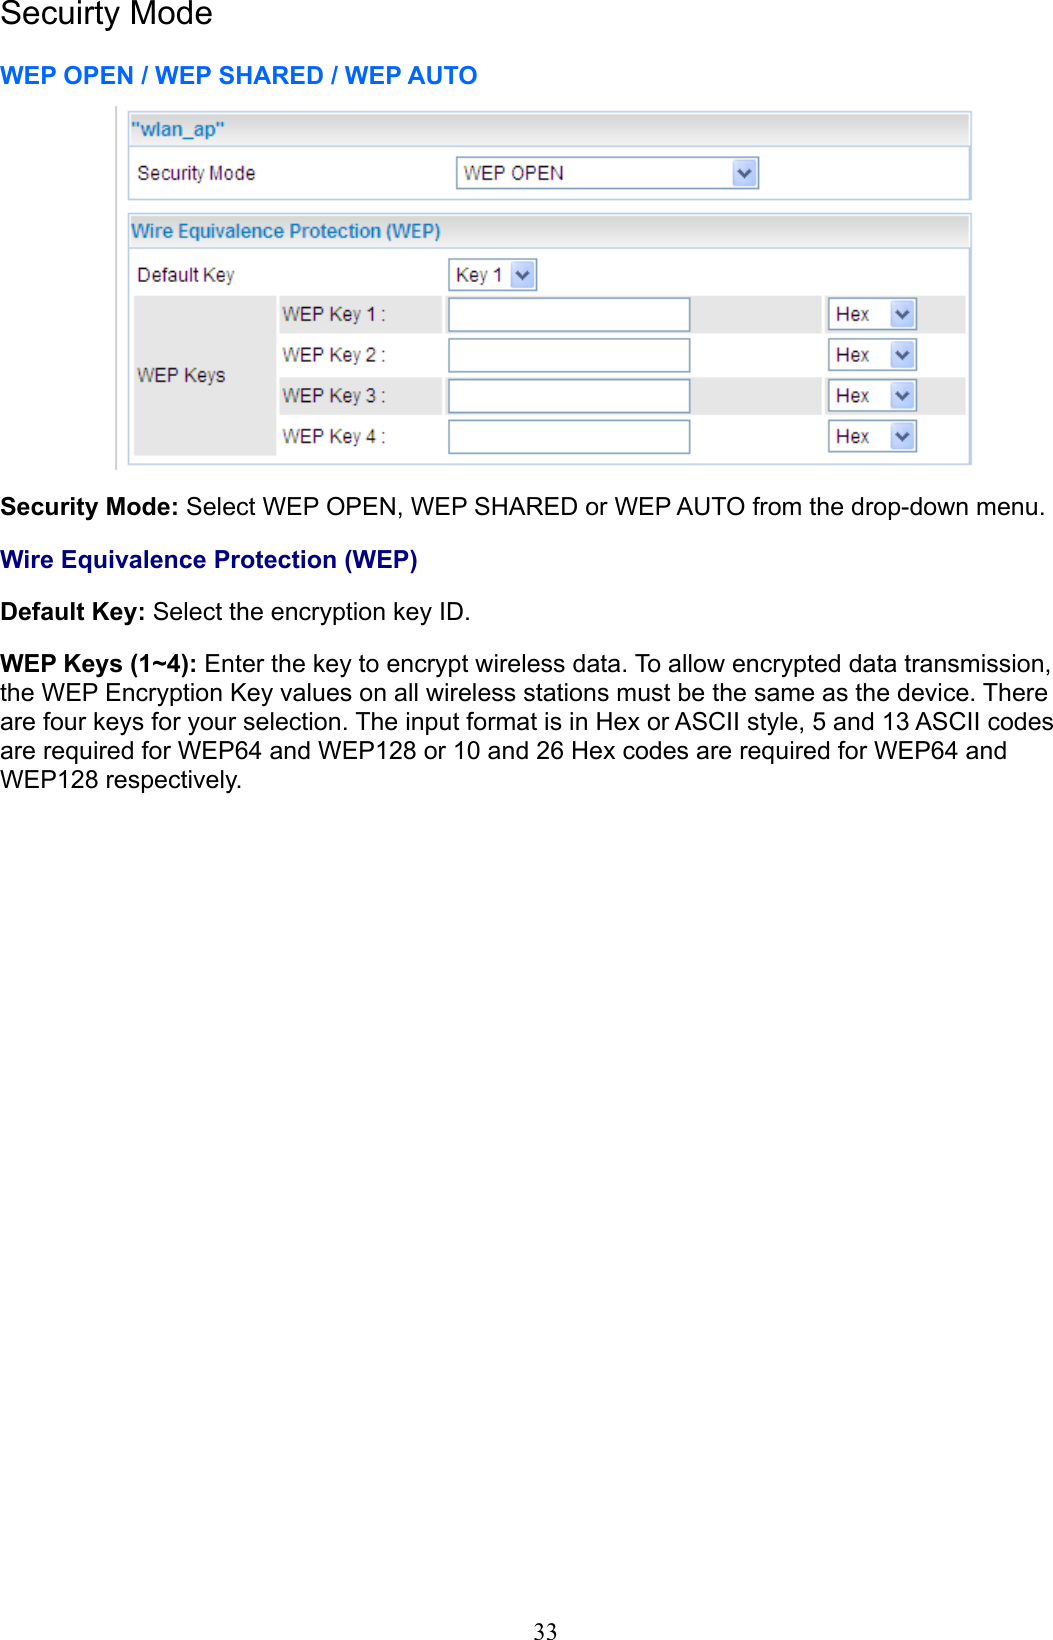 Secuirty ModeWEP OPEN / WEP SHARED / WEP AUTOSecurity Mode: Select WEP OPEN, WEP SHARED or WEP AUTO from the drop-down menu.Wire Equivalence Protection (WEP)Default Key: Select the encryption key ID.WEP Keys (1~4): Enter the key to encrypt wireless data. To allow encrypted data transmission, the WEP Encryption Key values on all wireless stations must be the same as the device. There are four keys for your selection. The input format is in Hex or ASCII style, 5 and 13 ASCII codes are required for WEP64 and WEP128 or 10 and 26 Hex codes are required for WEP64 and WEP128 respectively.33